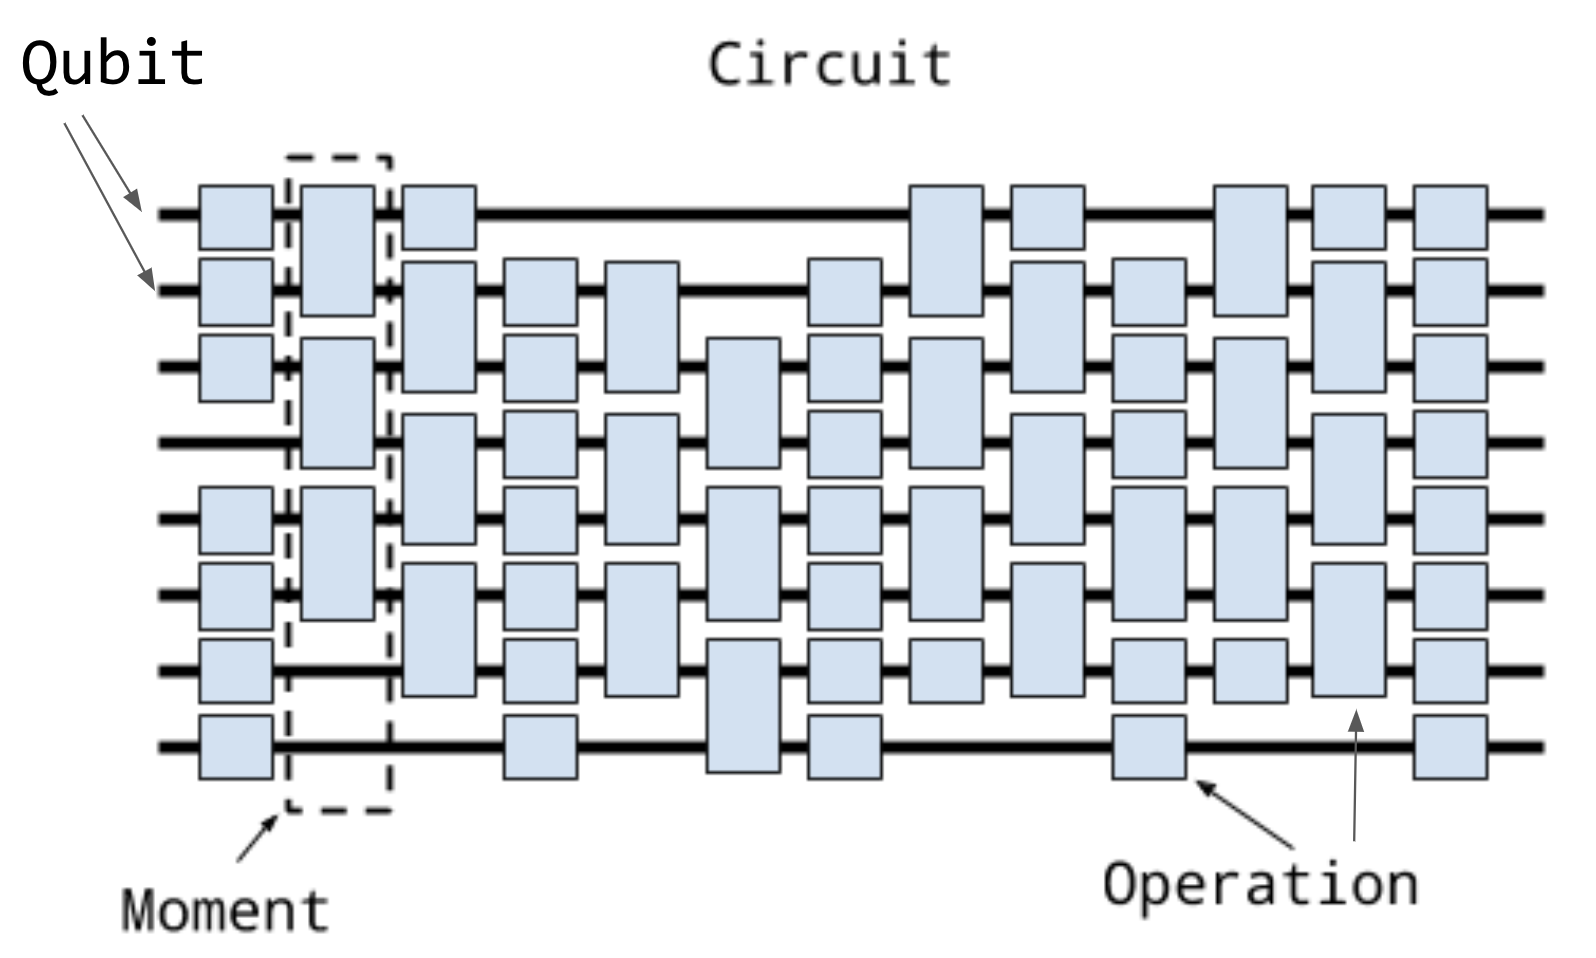 Circuits and Moments